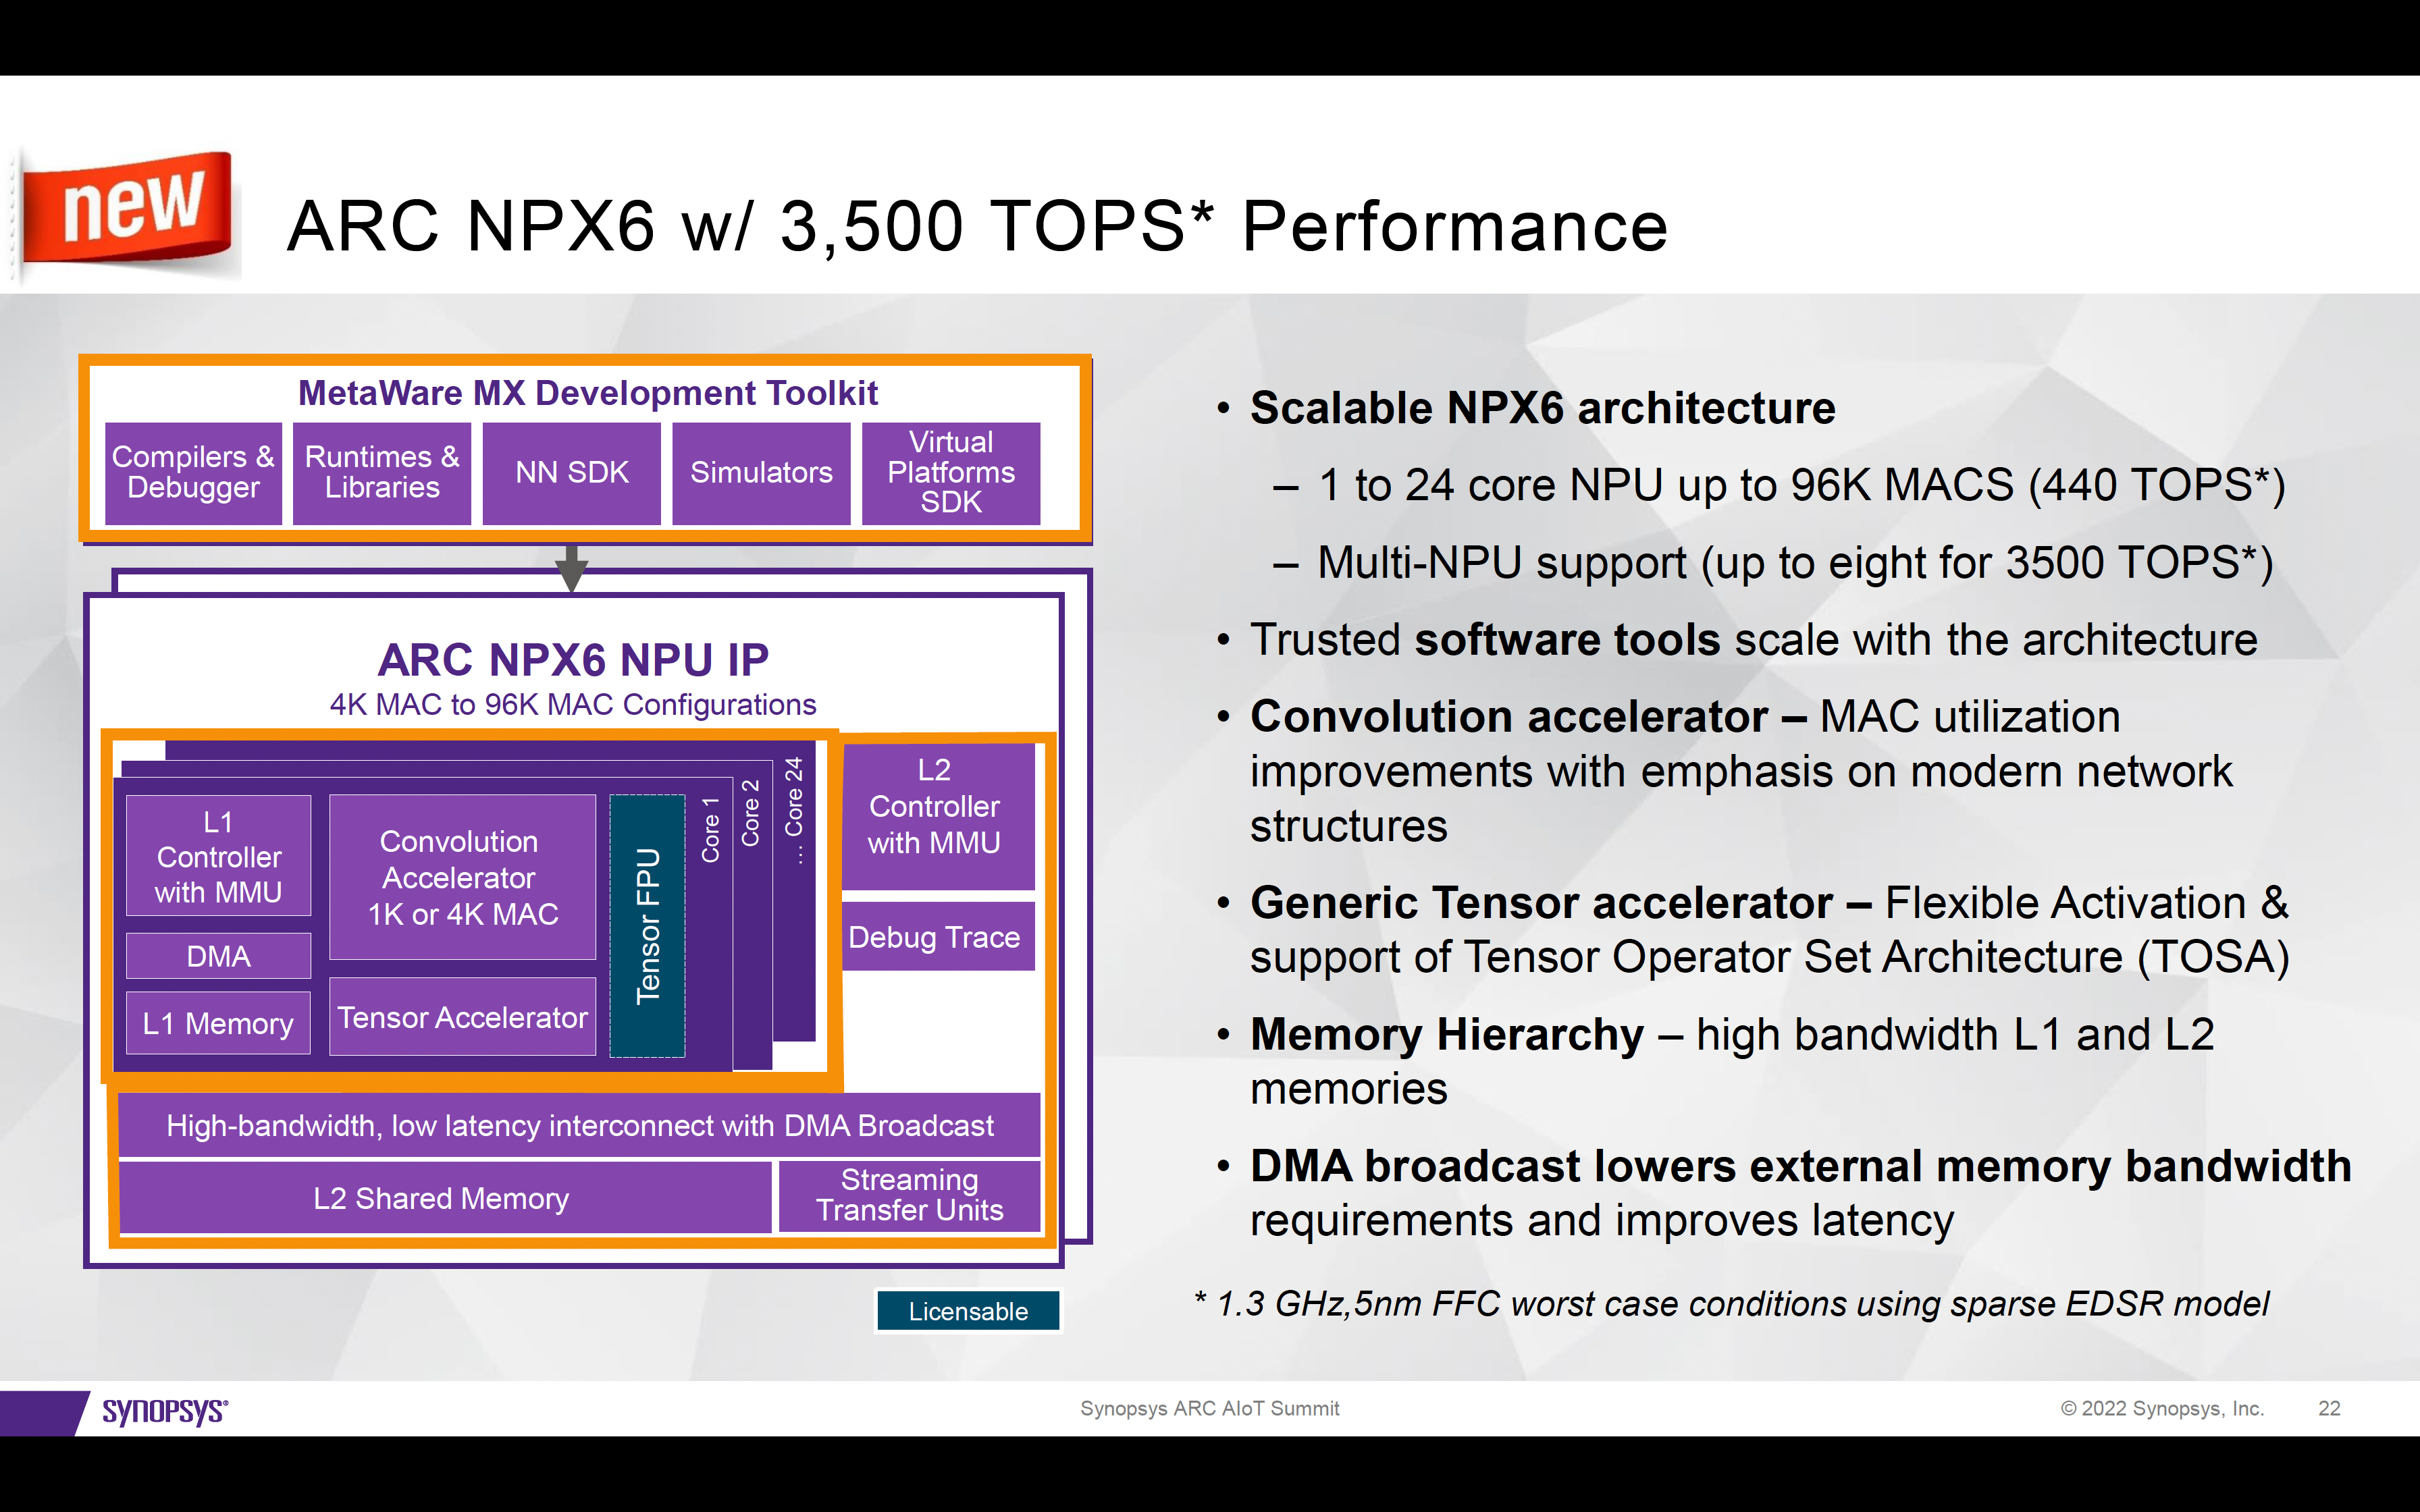 ARC NPX6 with 3,500 TOPS Performance